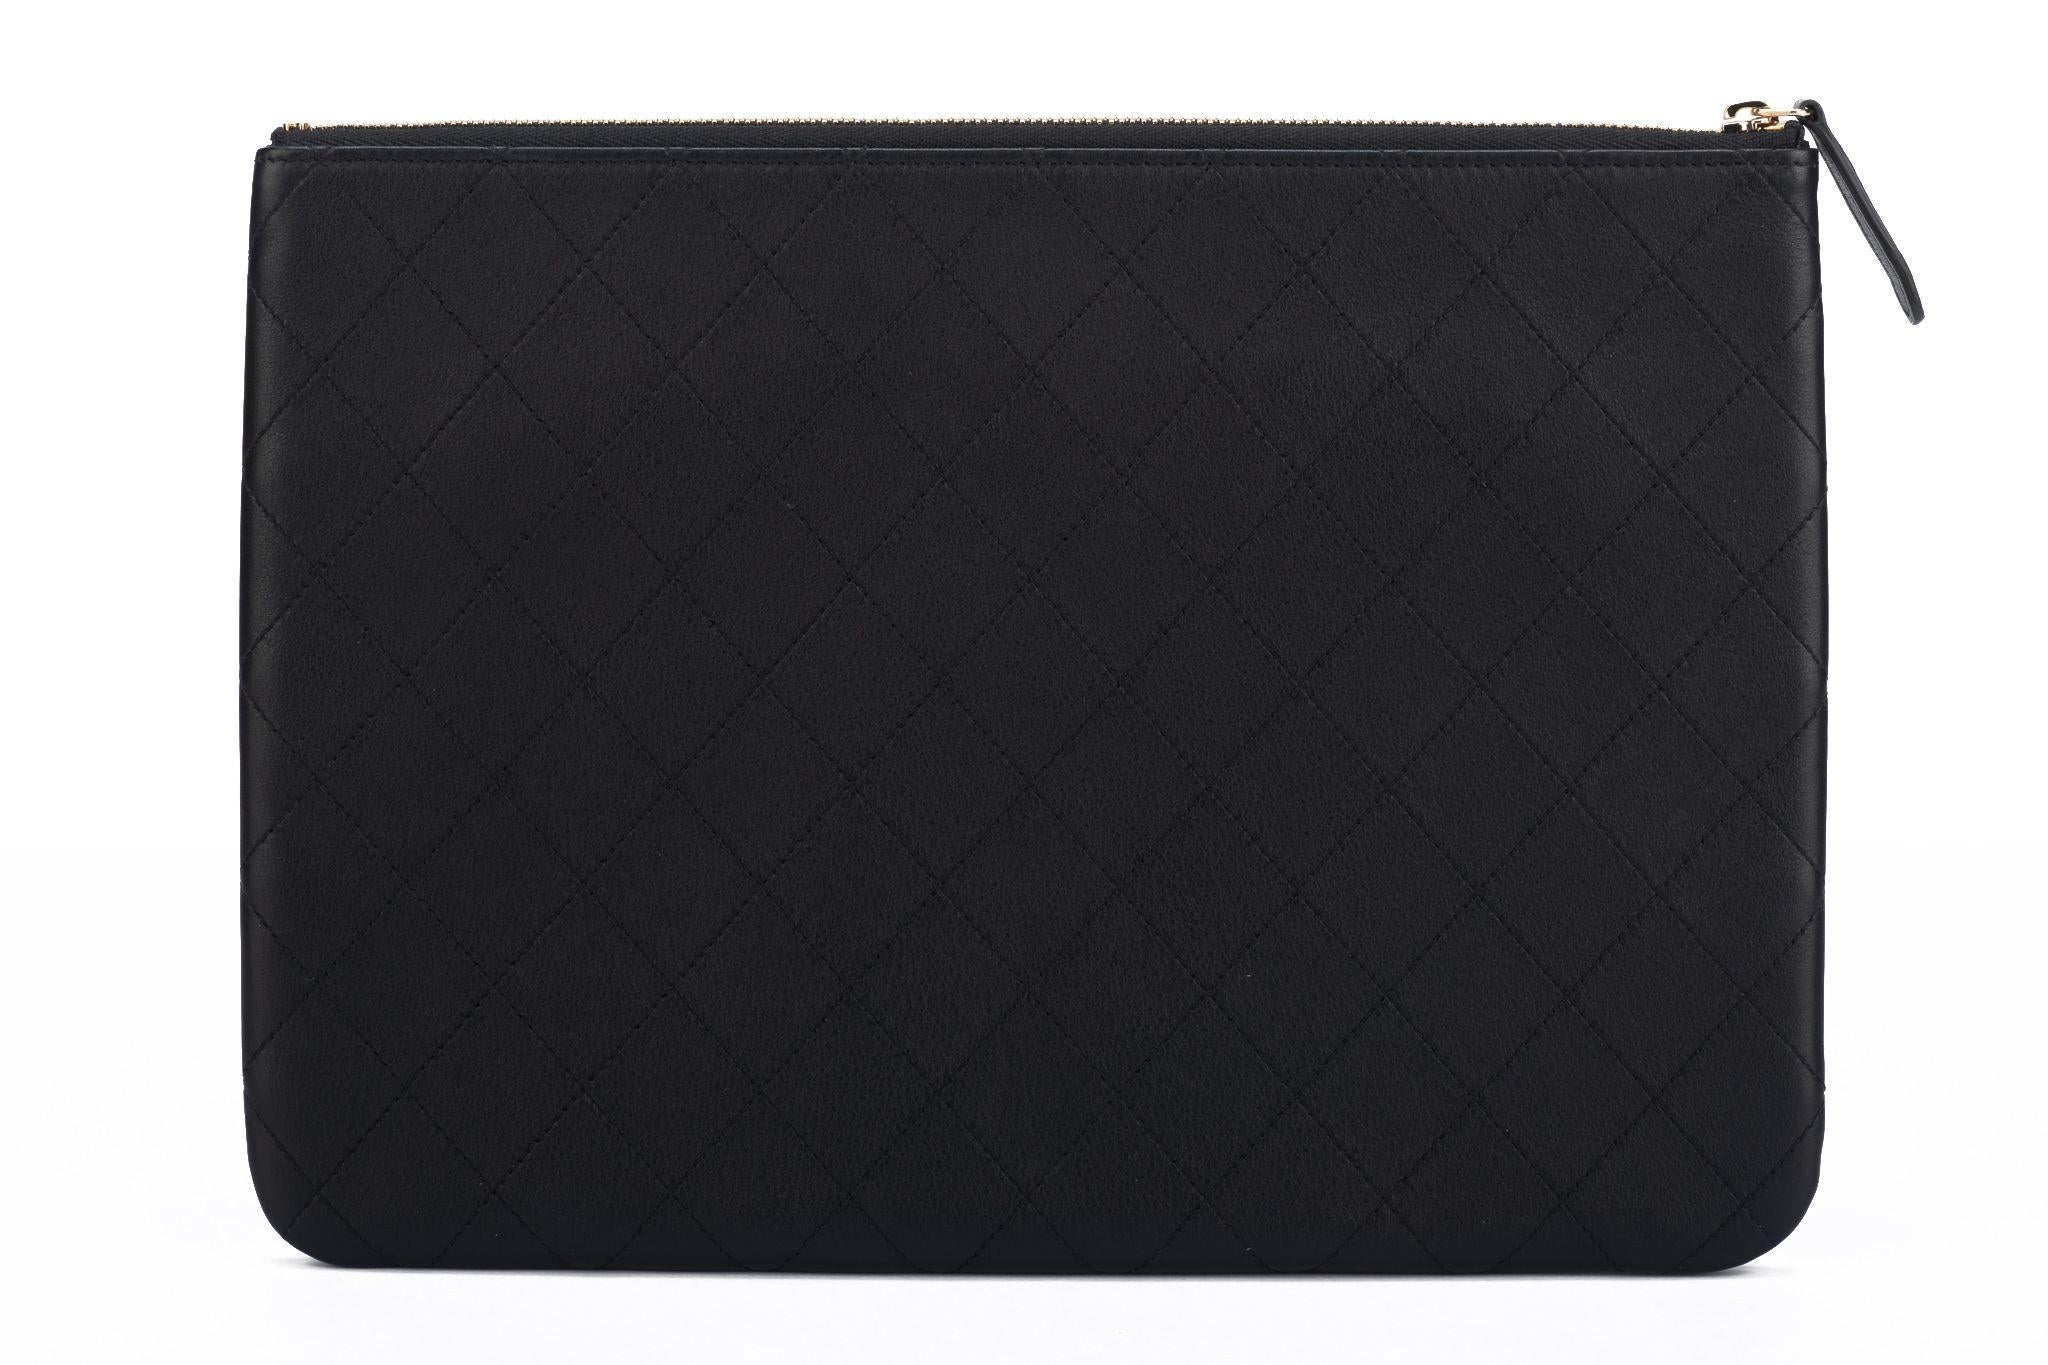 Chanel BNIB Black Quilted Clutch In New Condition For Sale In West Hollywood, CA